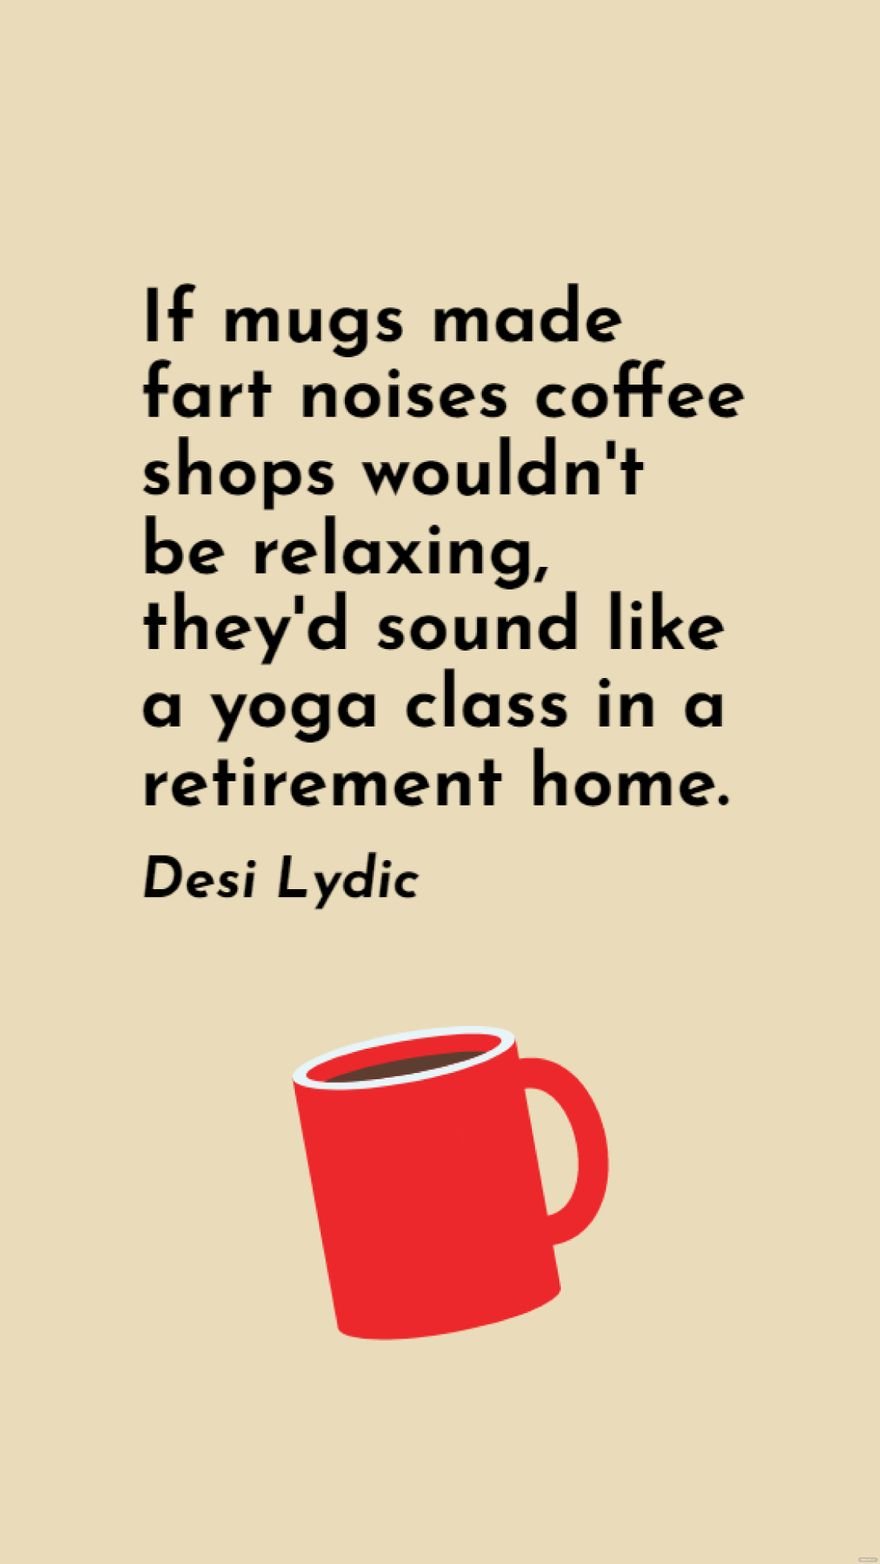 Free Desi Lydic - If mugs made fart noises coffee shops wouldn't be relaxing, they'd sound like a yoga class in a retirement home. in JPG